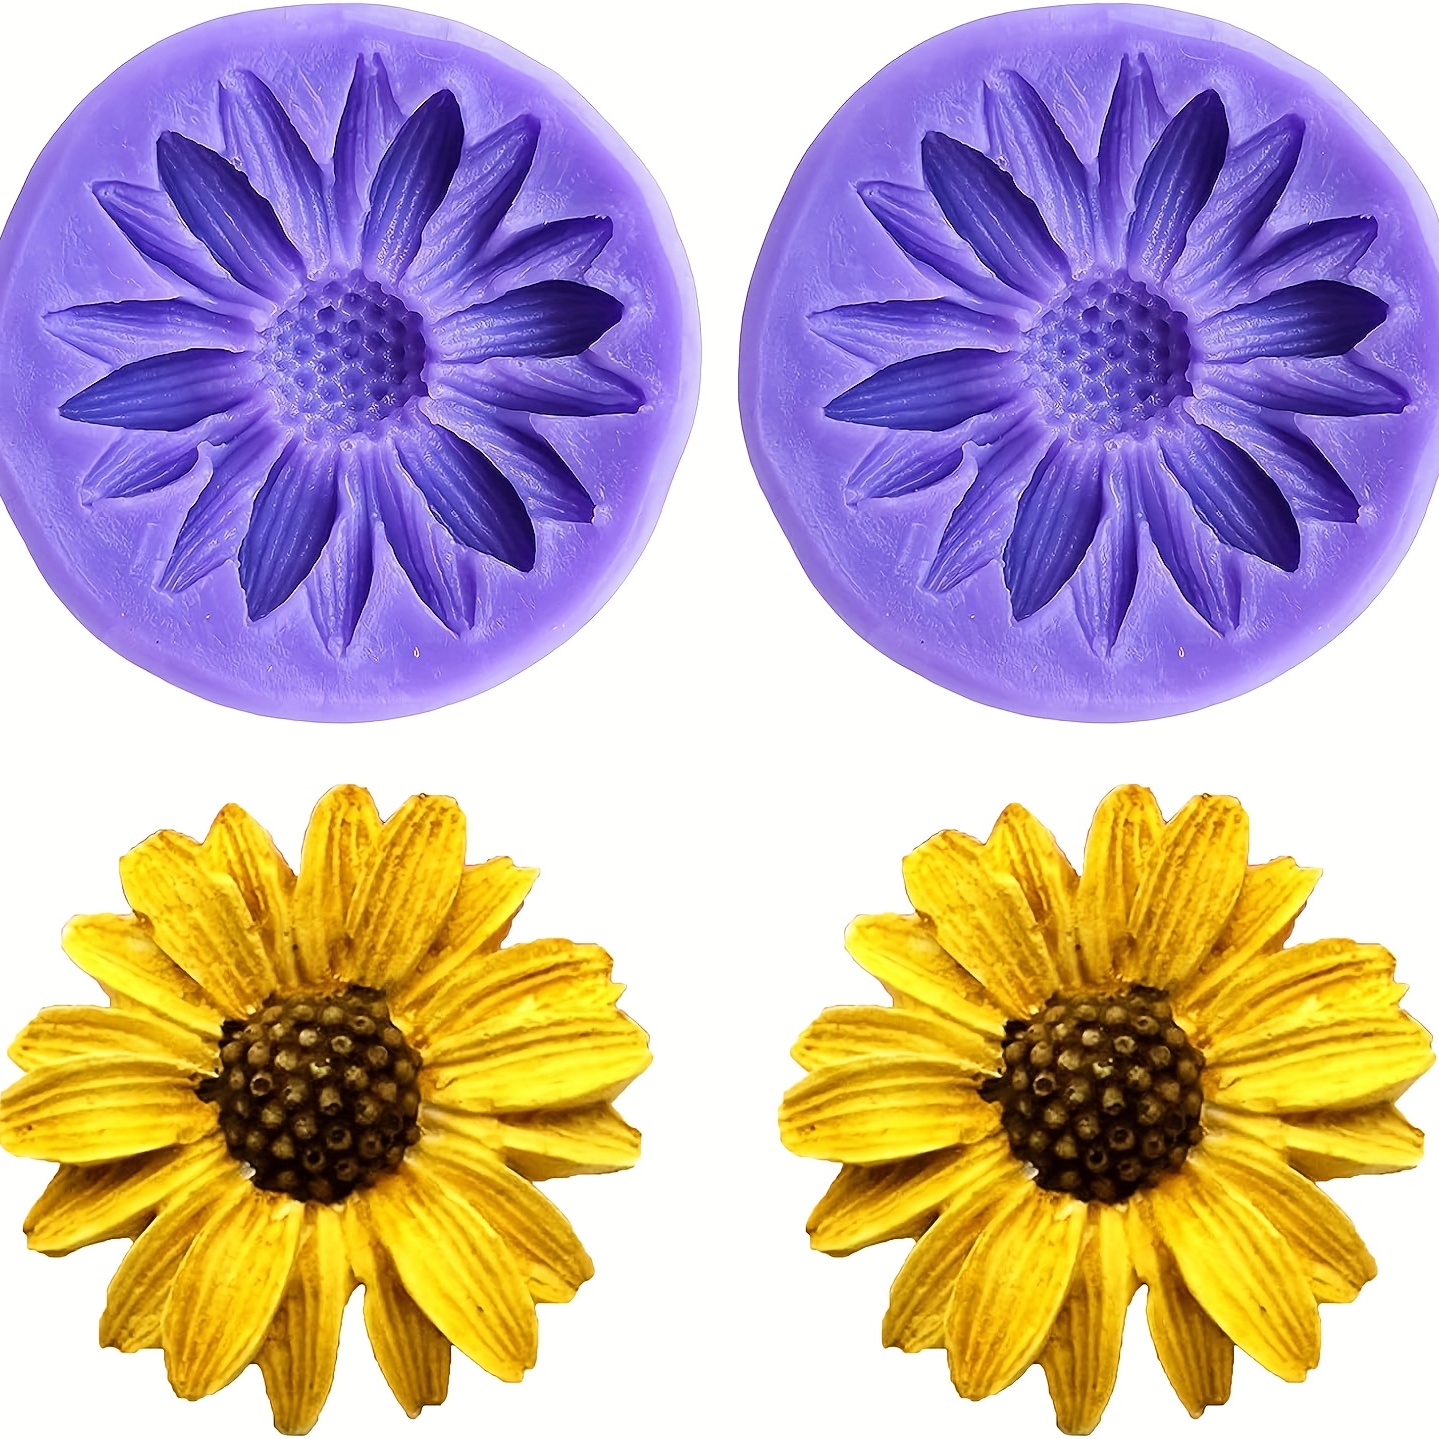 

2pcs, Sunflower Flowers Silicone Molds For Cake Topper Decoration, Premium Fondant Mold For Diy Chocolate Candy Jelly Resin Clay Crafts Mould Baby Shower Party Supplies